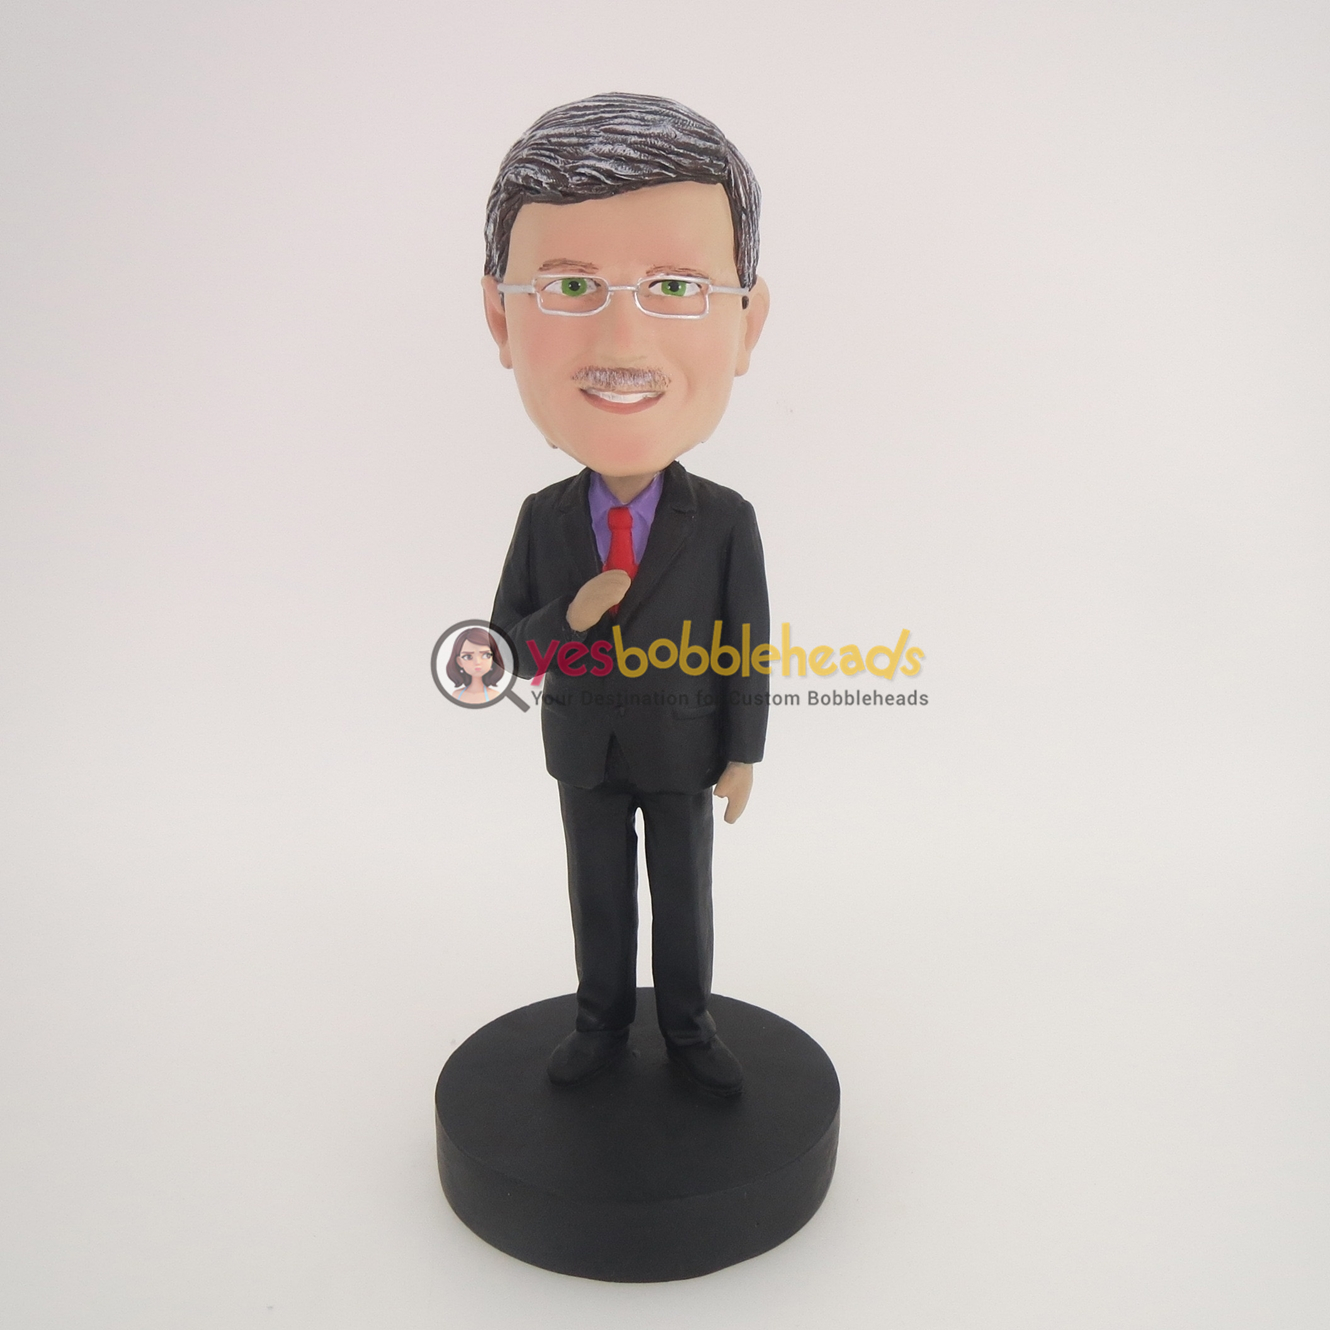 Picture of Custom Bobblehead Doll: Business Man Holding Tie